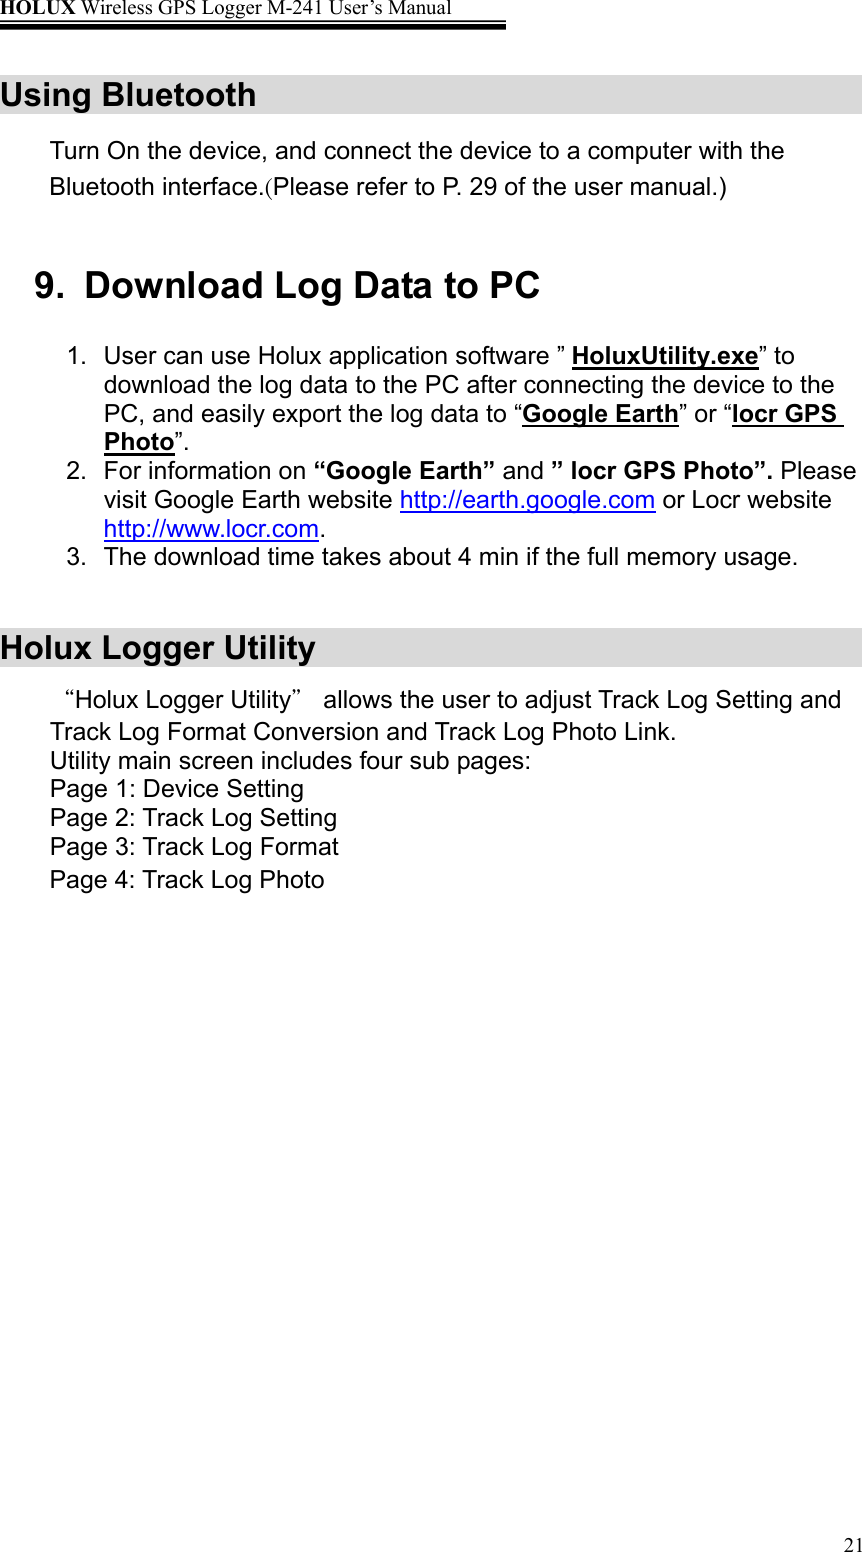 HOLUX Wireless GPS Logger M-241 User’s Manual   21Using Bluetooth     Turn On the device, and connect the device to a computer with the Bluetooth interface.(Please refer to P. 29 of the user manual.)   9.  Download Log Data to PC 1.  User can use Holux application software ” HoluxUtility.exe” to download the log data to the PC after connecting the device to the PC, and easily export the log data to “Google Earth” or “locr GPS Photo”.  2.  For information on “Google Earth” and ” locr GPS Photo”. Please visit Google Earth website http://earth.google.com or Locr website http://www.locr.com. 3.  The download time takes about 4 min if the full memory usage.  Holux Logger Utility   “Holux Logger Utility” allows the user to adjust Track Log Setting and Track Log Format Conversion and Track Log Photo Link. Utility main screen includes four sub pages: Page 1: Device Setting Page 2: Track Log Setting Page 3: Track Log Format Page 4: Track Log Photo 